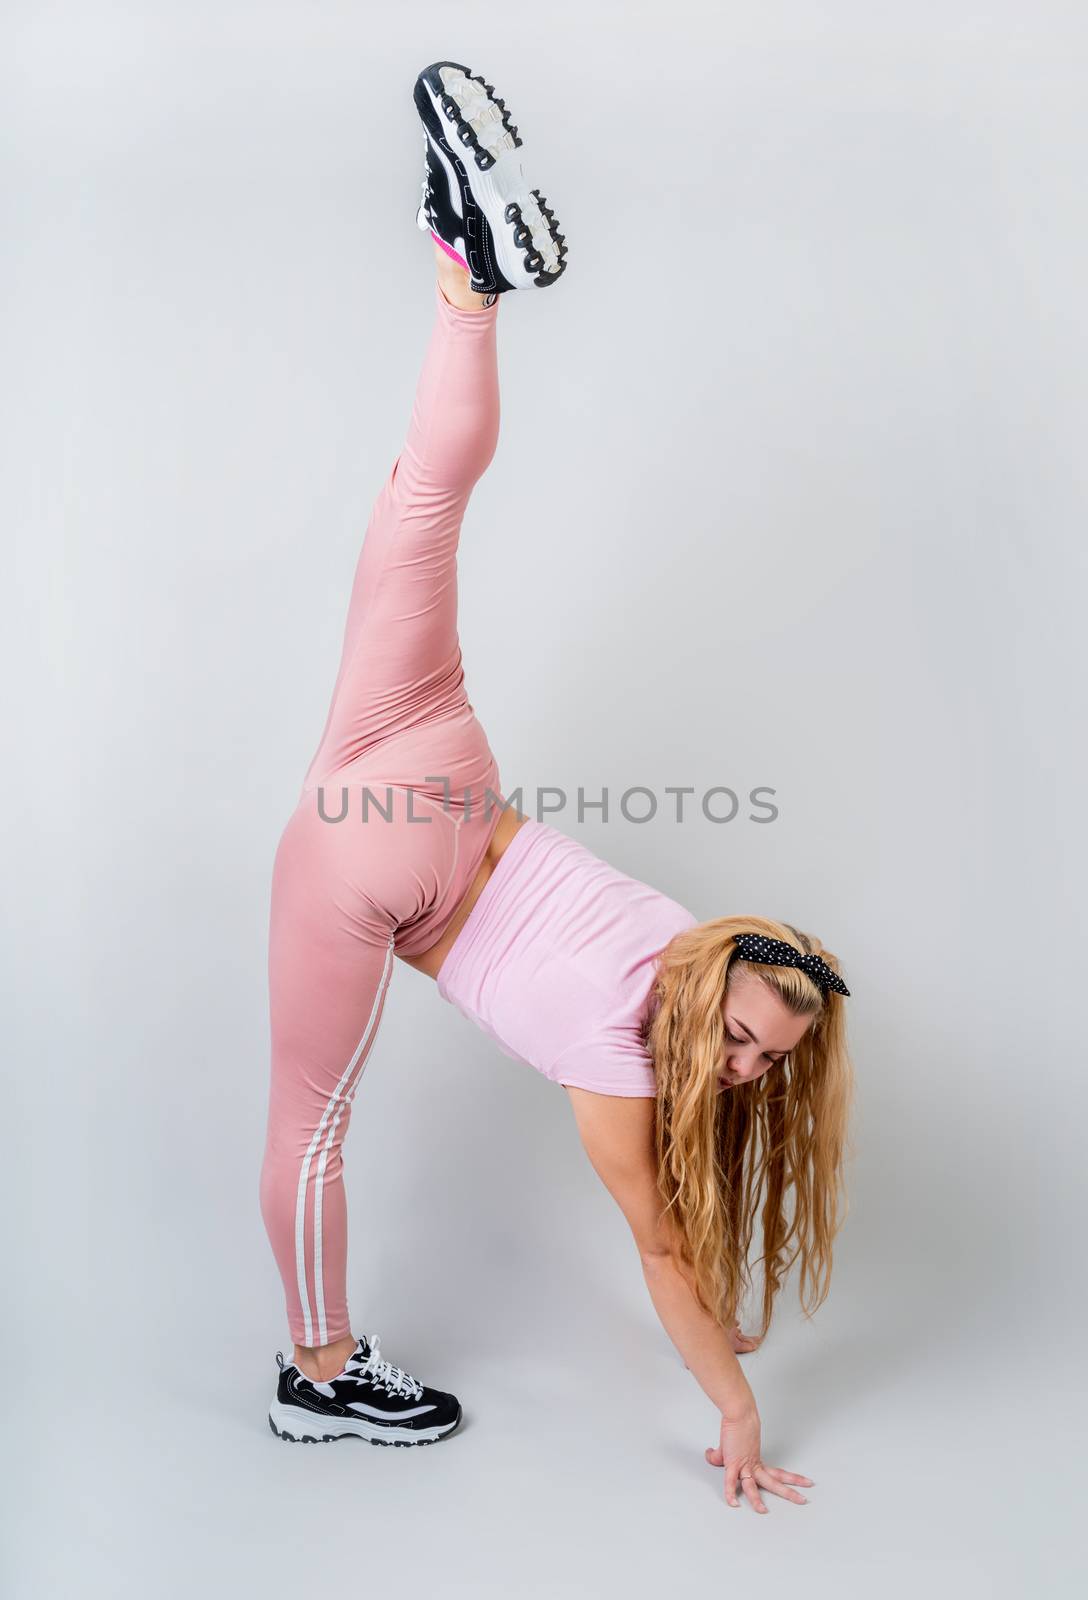 Acrobat woman wearing pink sportswear working out in the studio isolated on gray background by Desperada